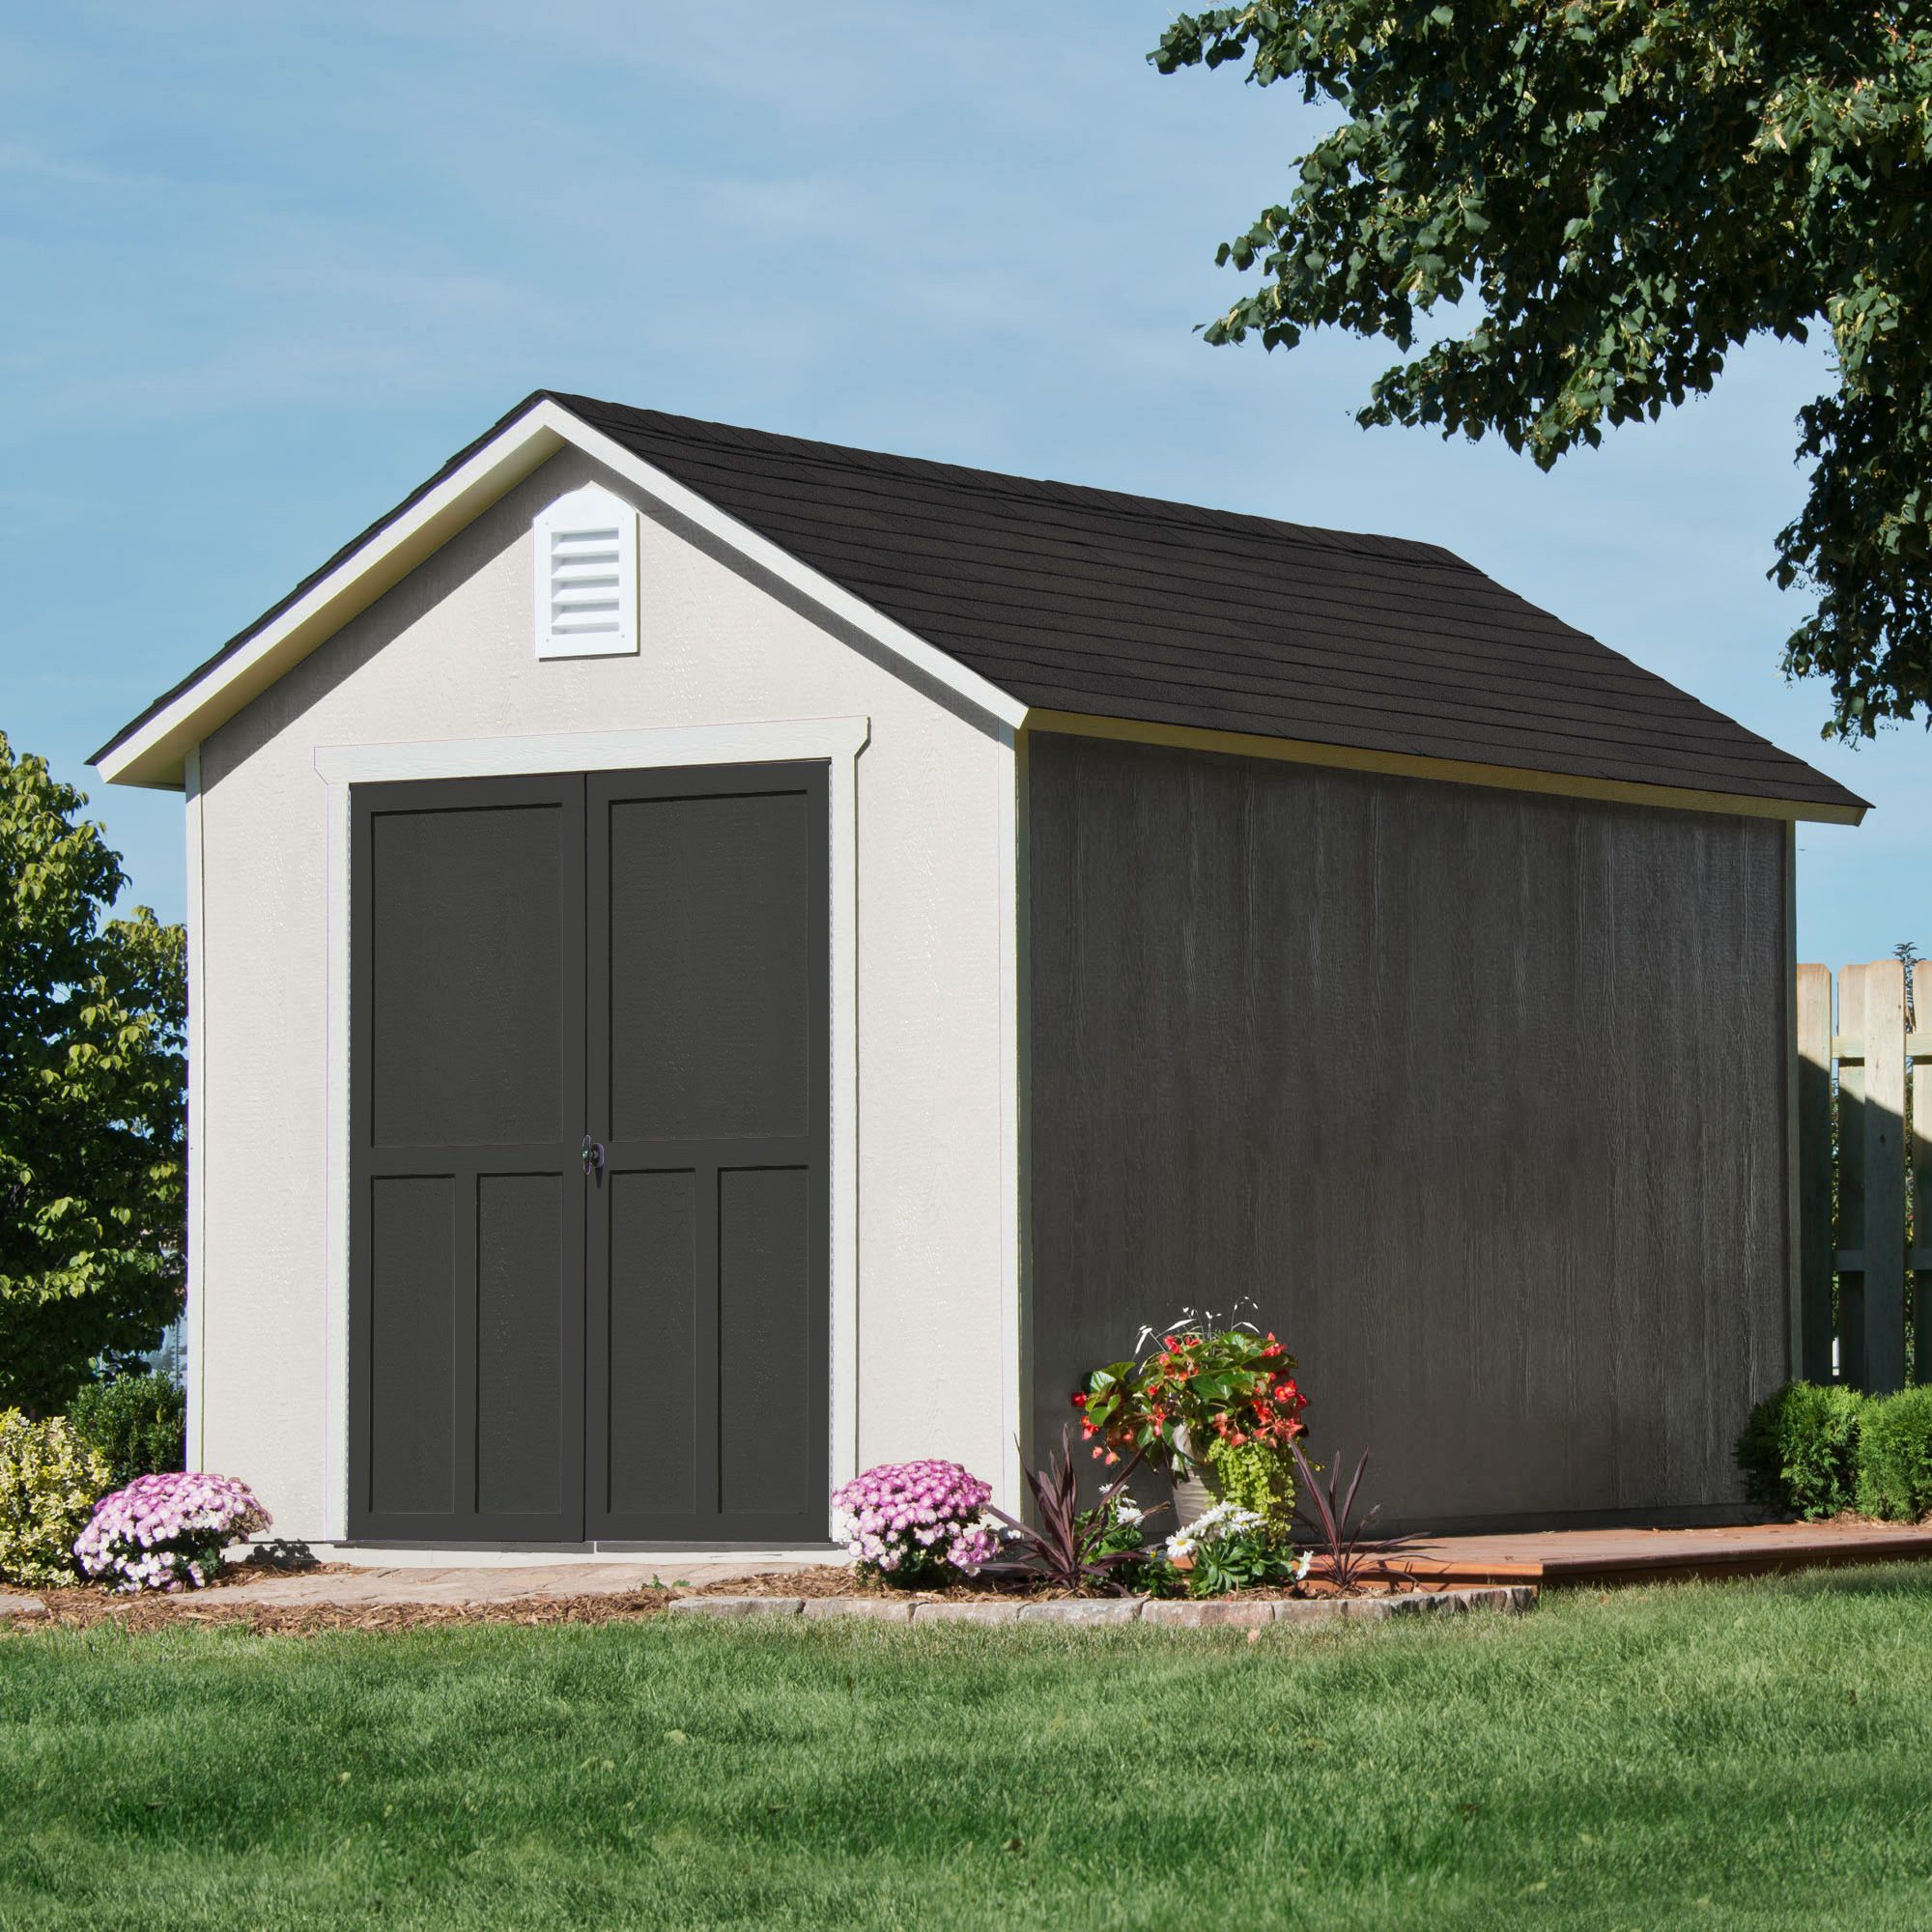 Handy Home Products Meridian 8' x 10' Wood Storage Shed with Floor